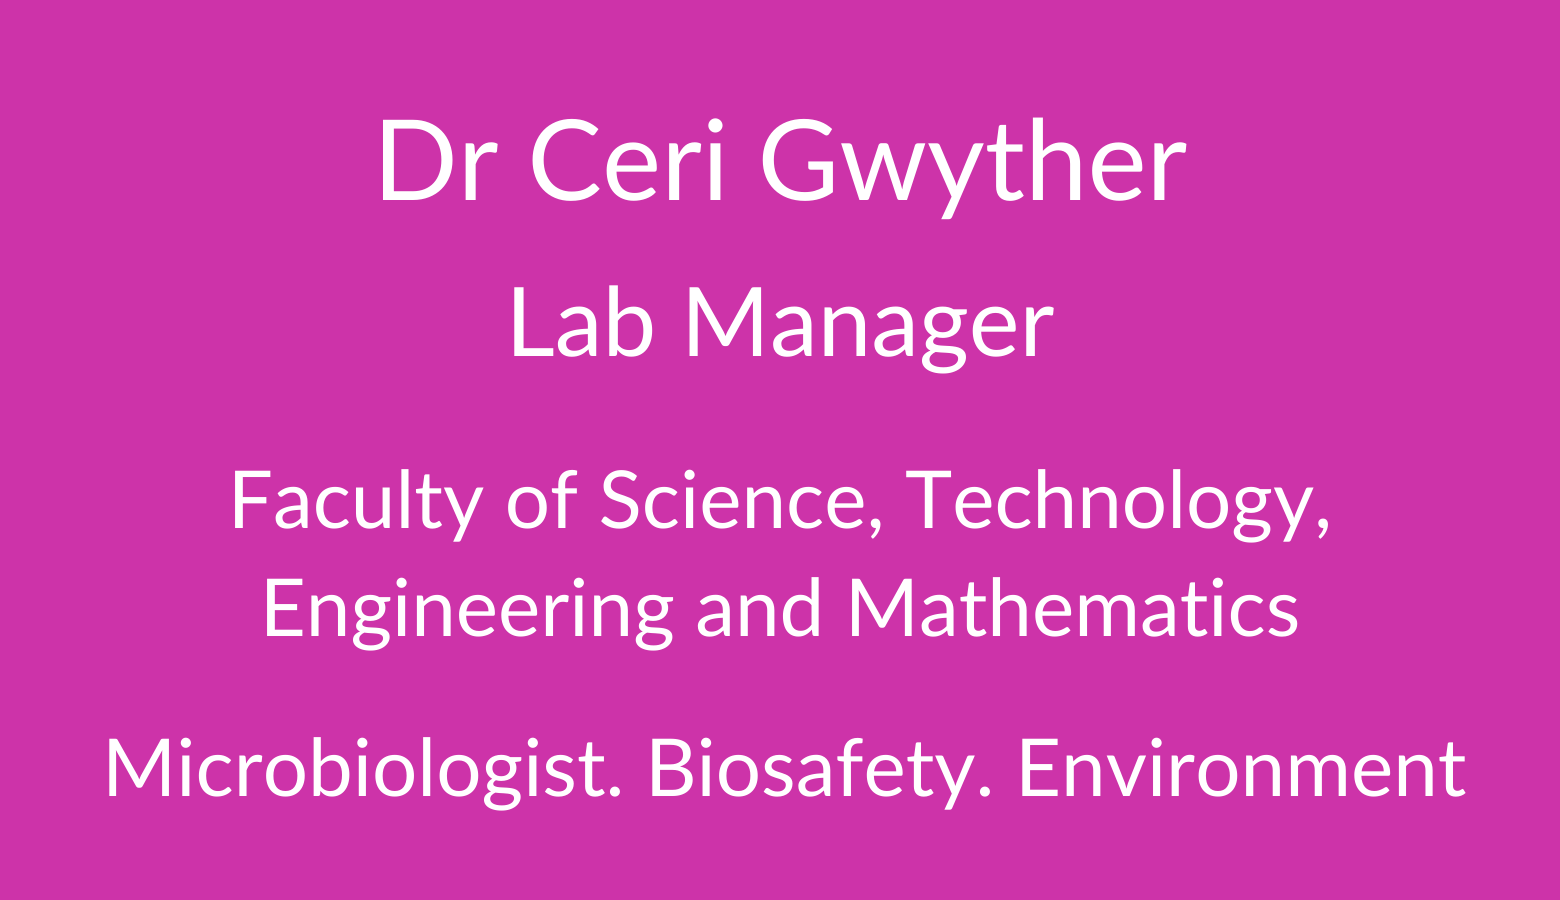 Dr Ceri Gwyther. Lab Manager Faculty of Science. Technology, Engineering and Mathematics. Microbiologist. Biosafety. Environment